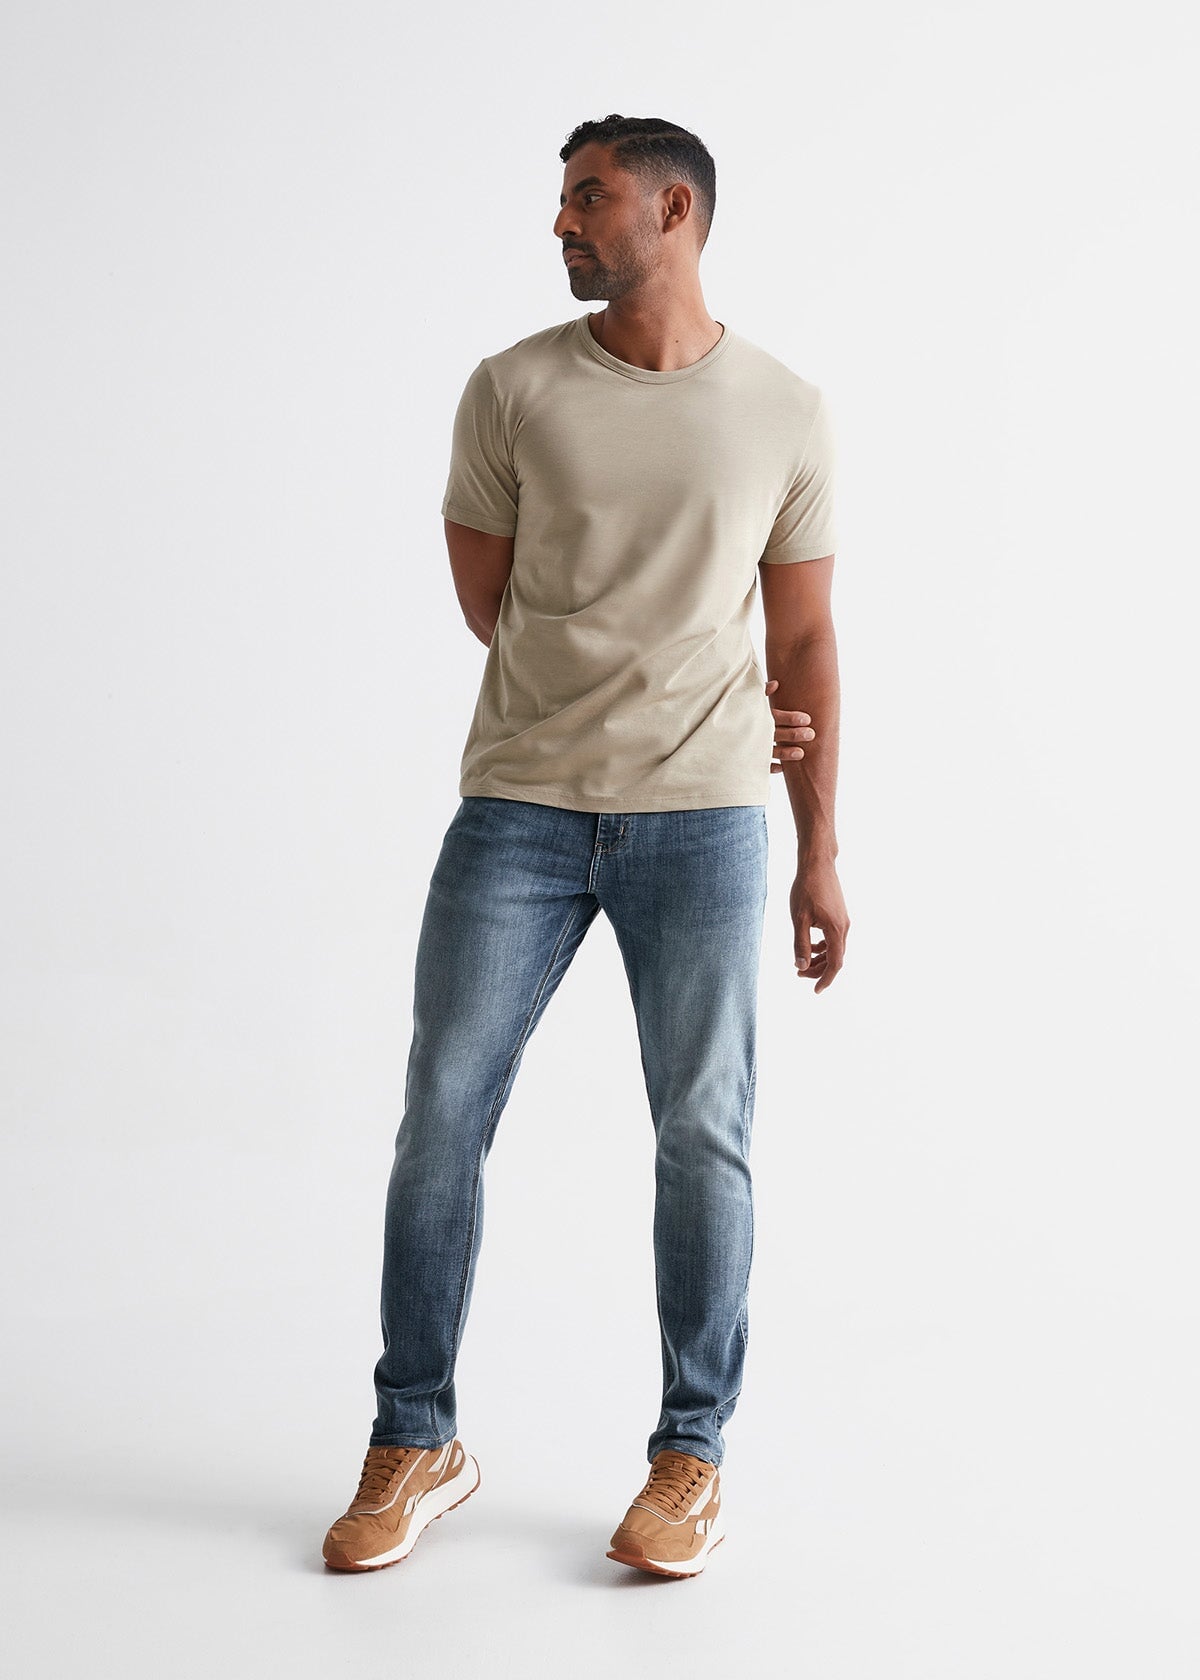 Men's Relaxed Fit Stretch Light Blue Jeans